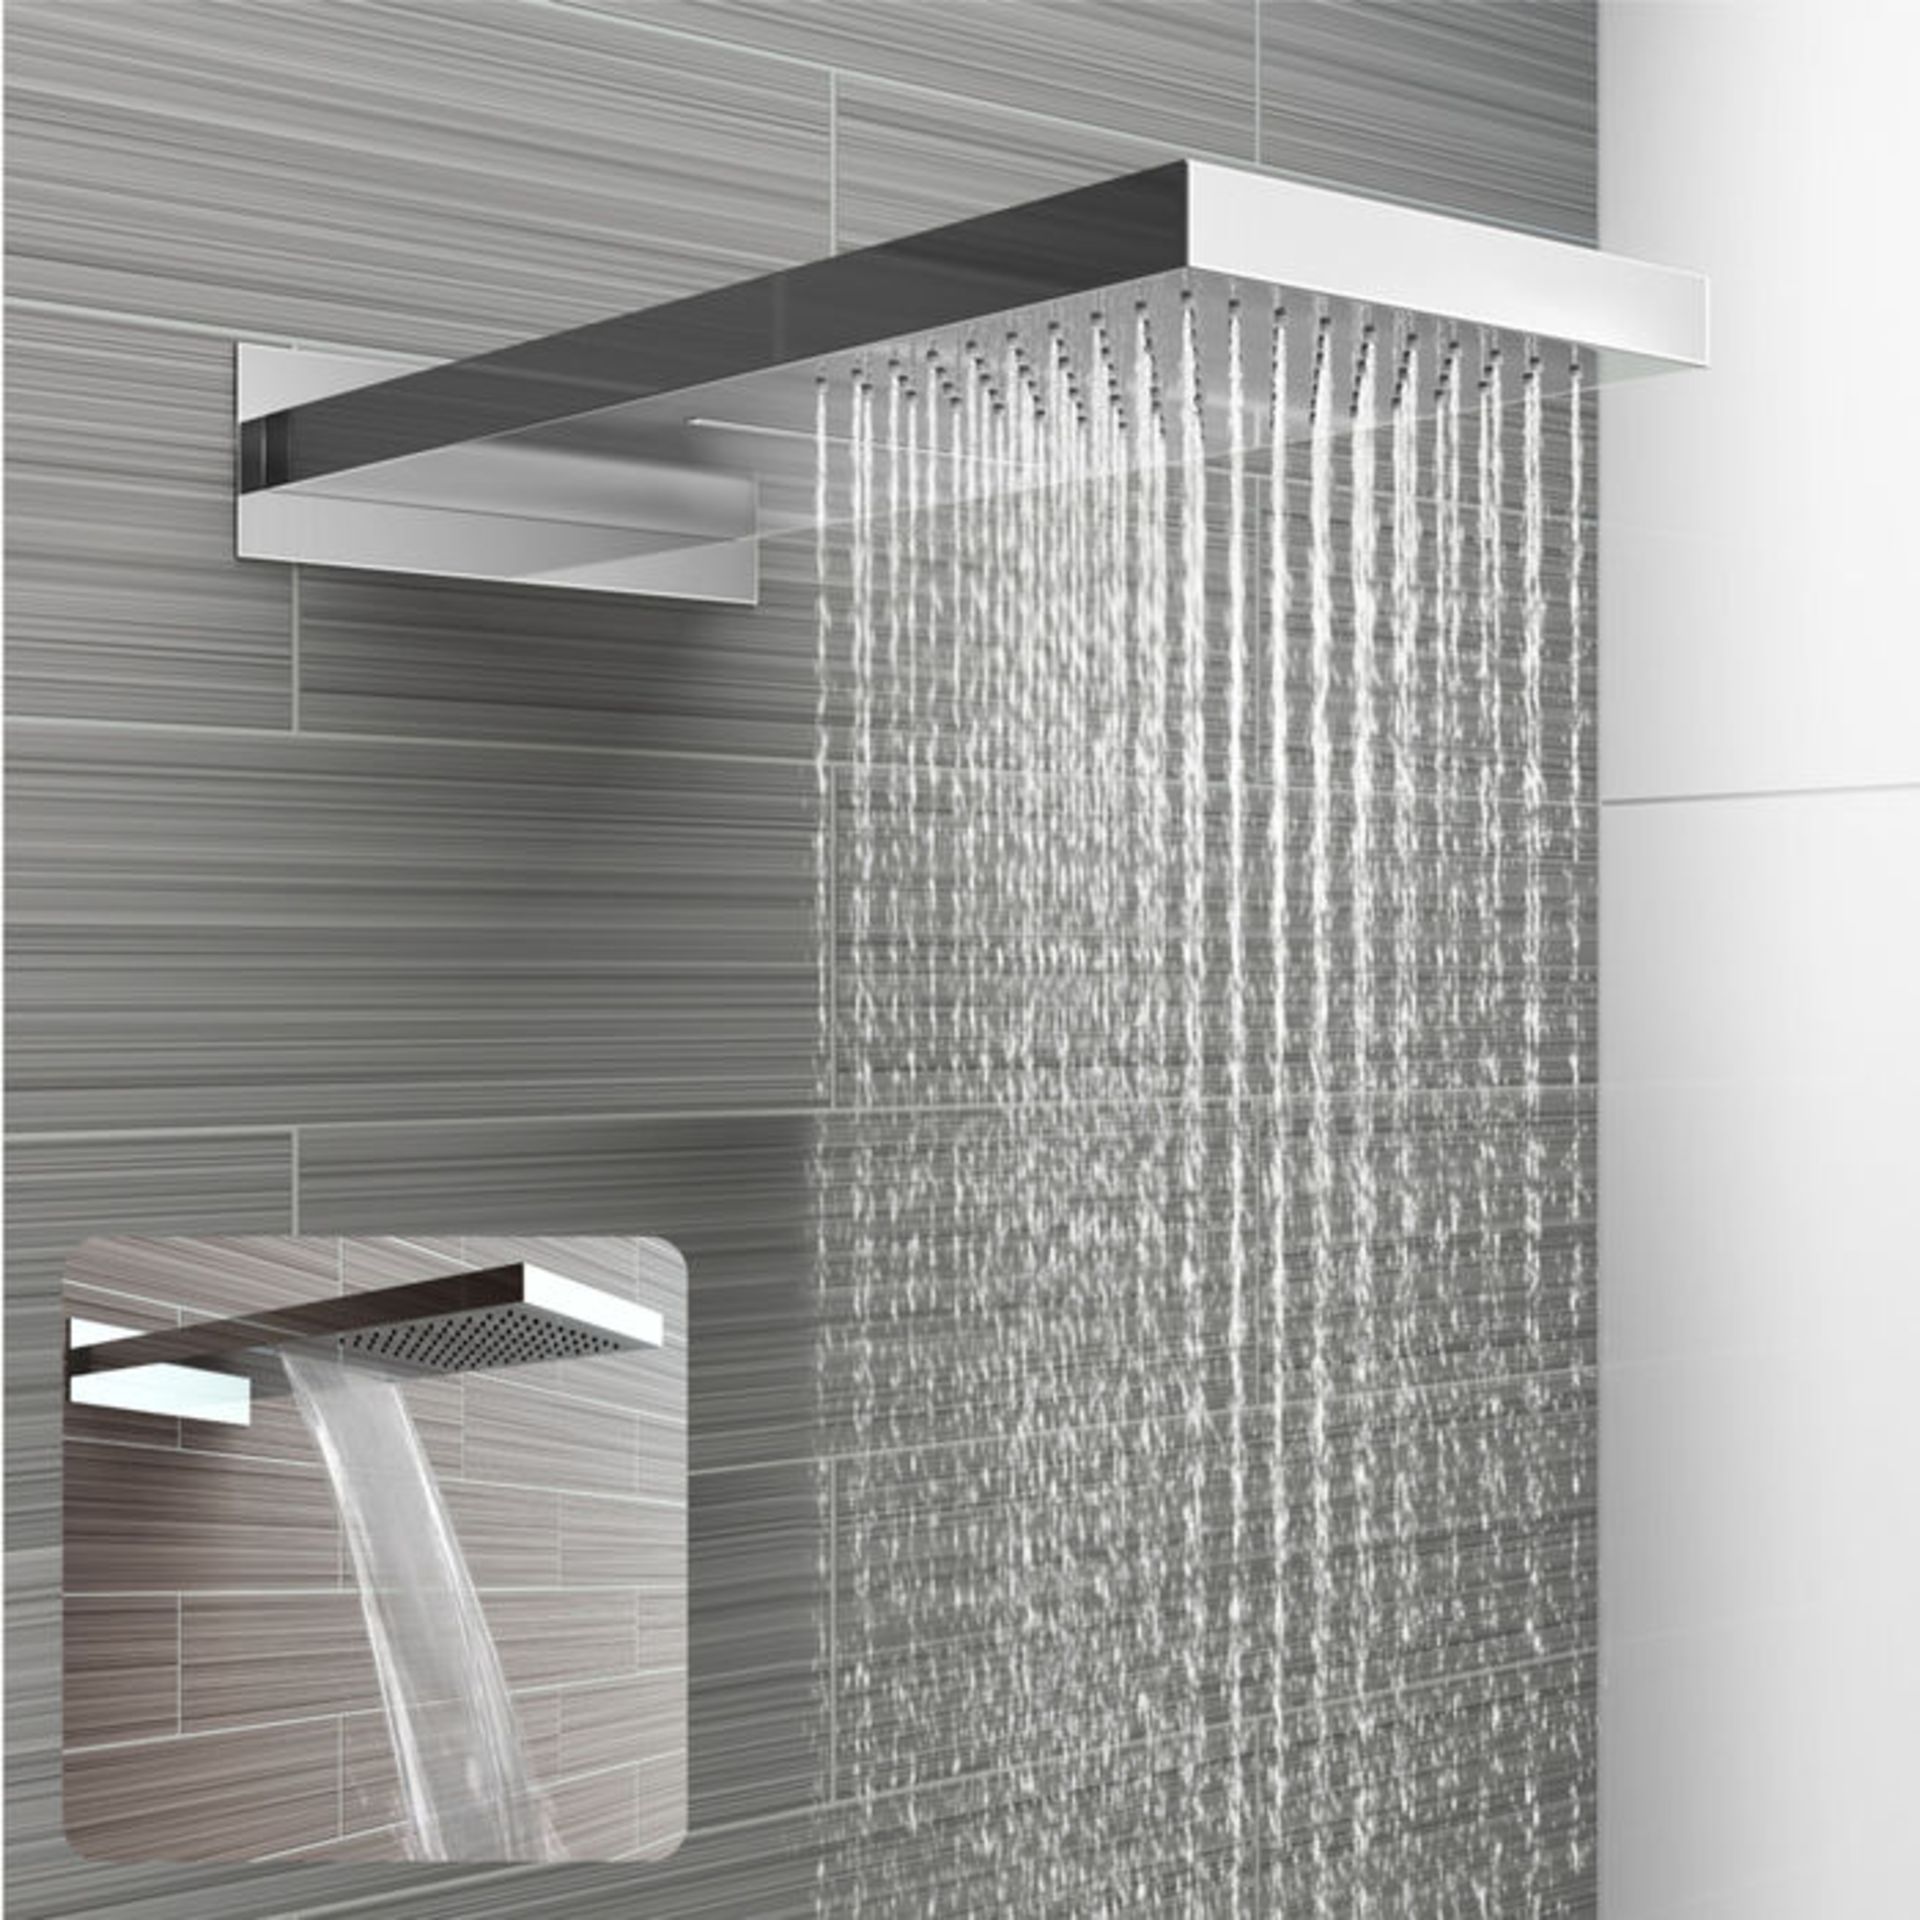 (S92) Stainless Steel 230x500mm Waterfall Shower Head. RRP £374.99 Dual function waterfall and